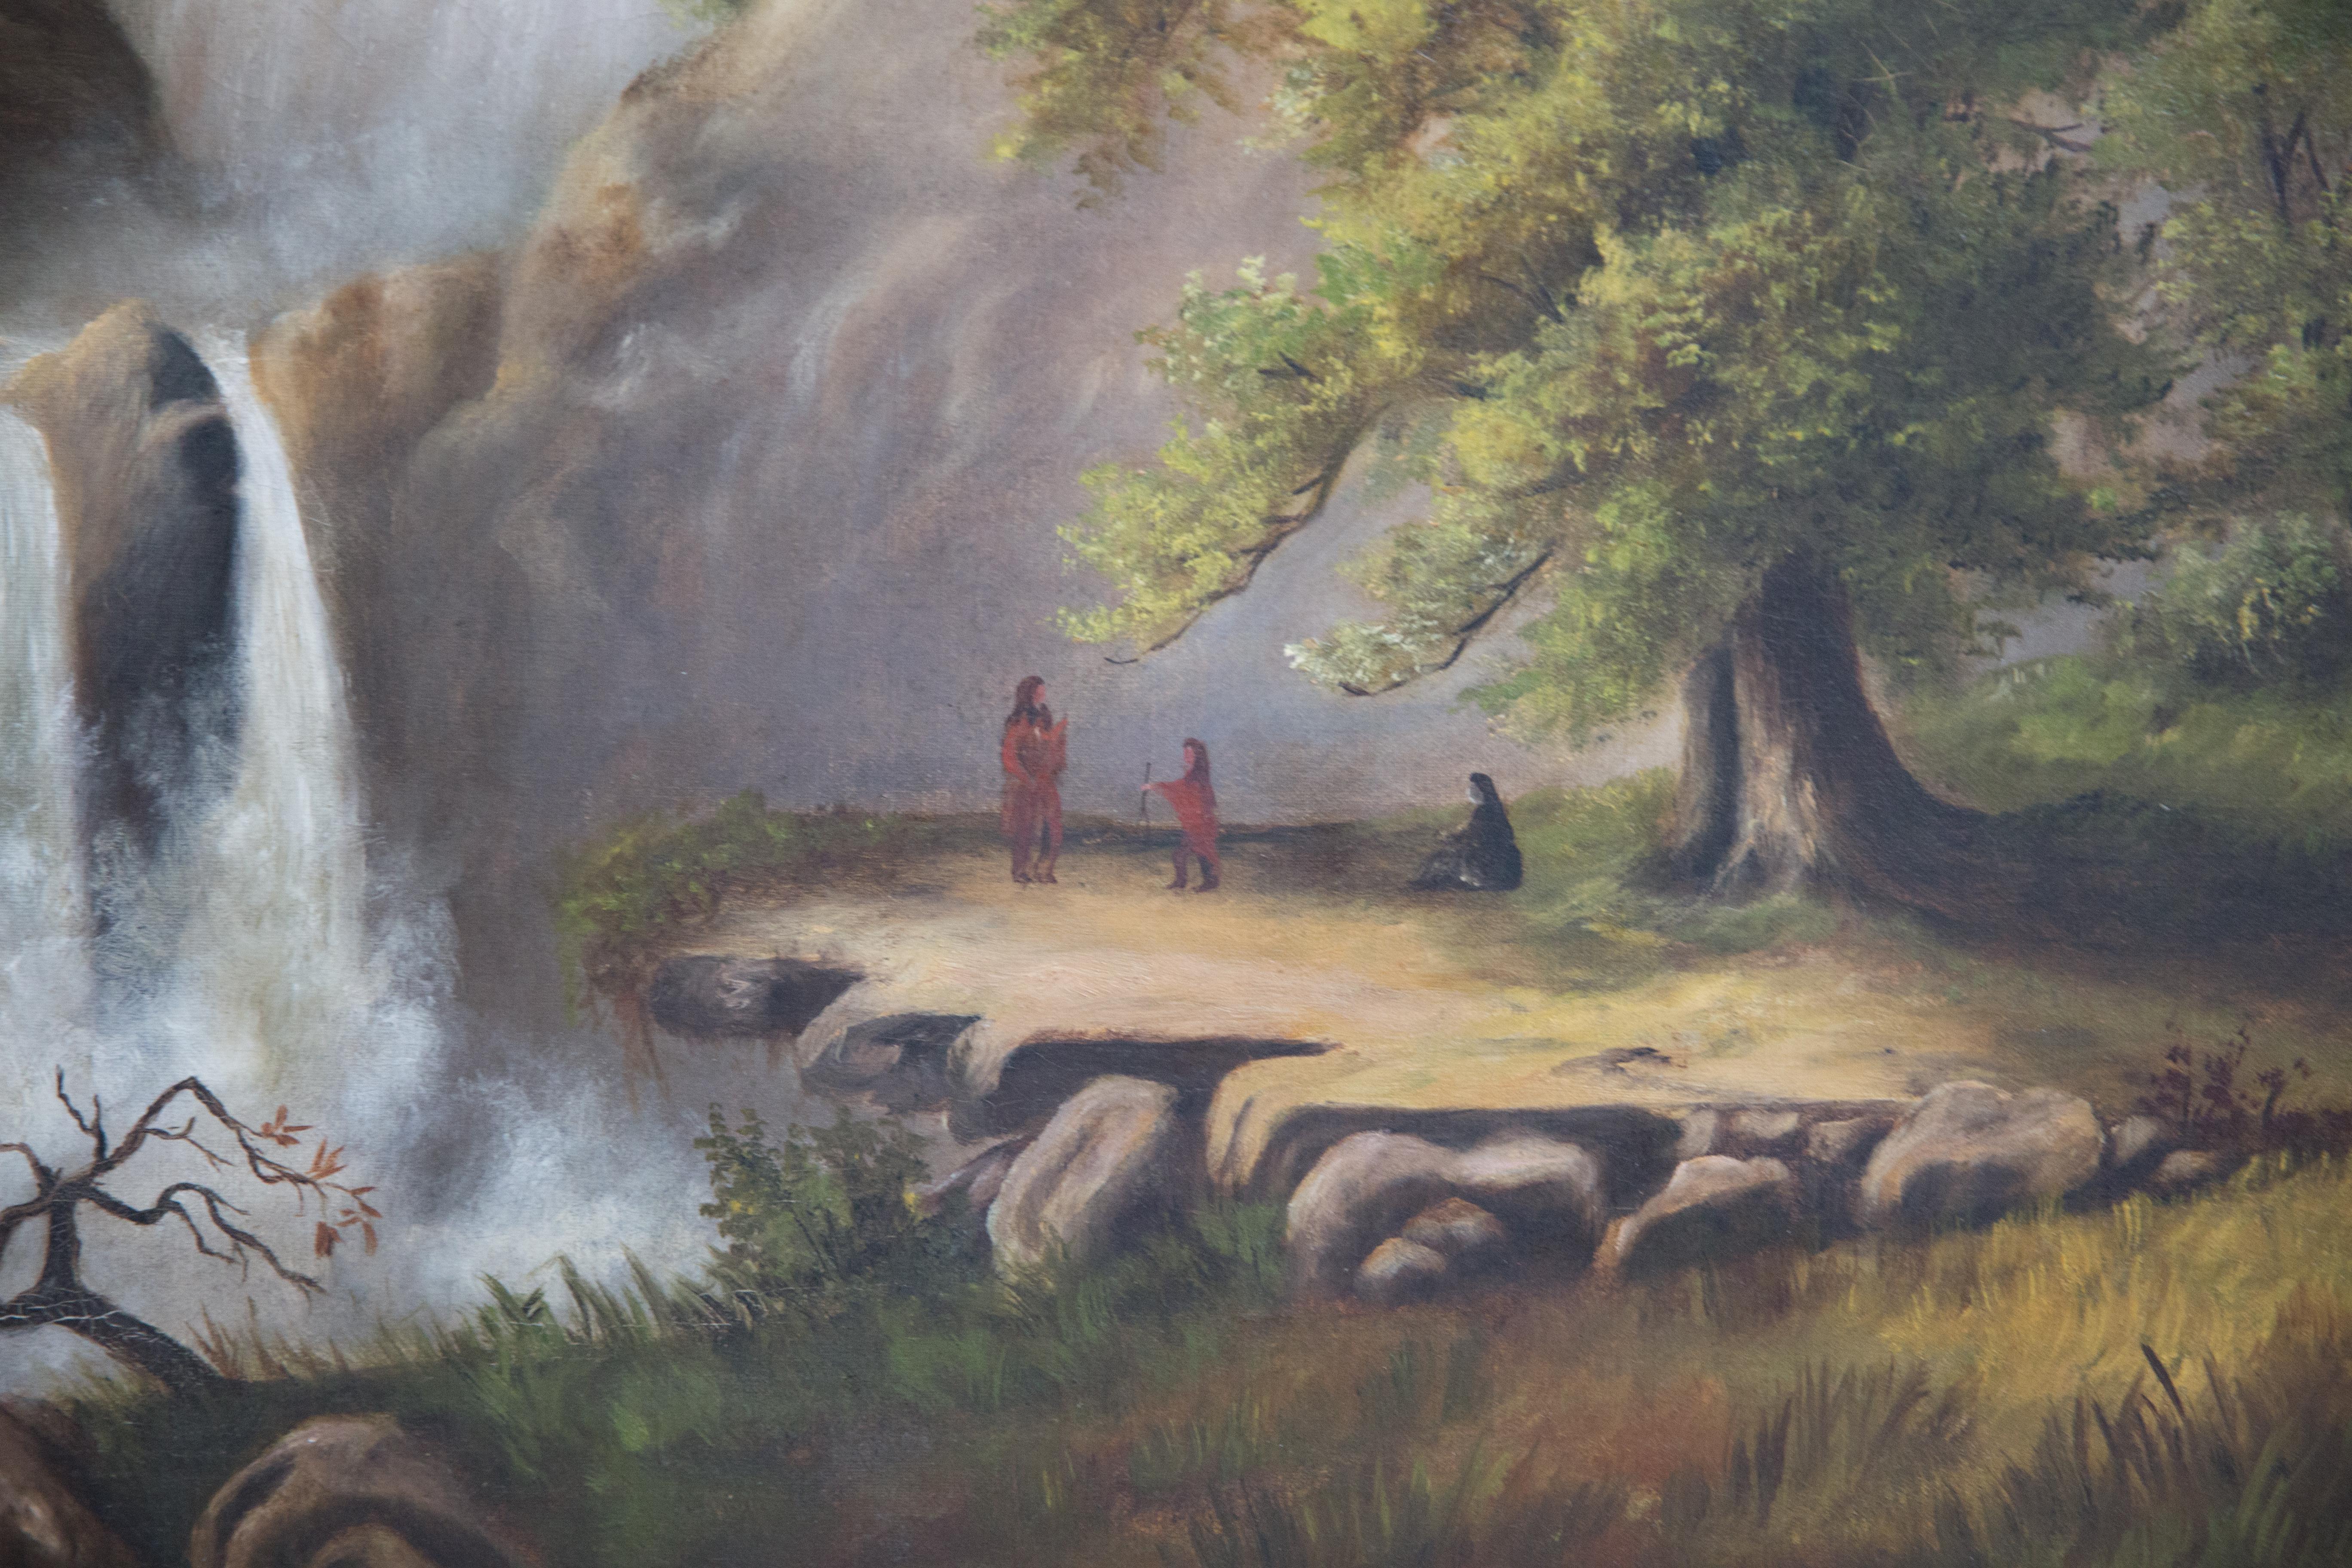 Offered is an antique 19th century large oil painting on canvas depicting the Yellowstone Valley with native Americans standing before a waterfall. The piece is in good condition, canvas without any evident punctures or rips, but with some frame